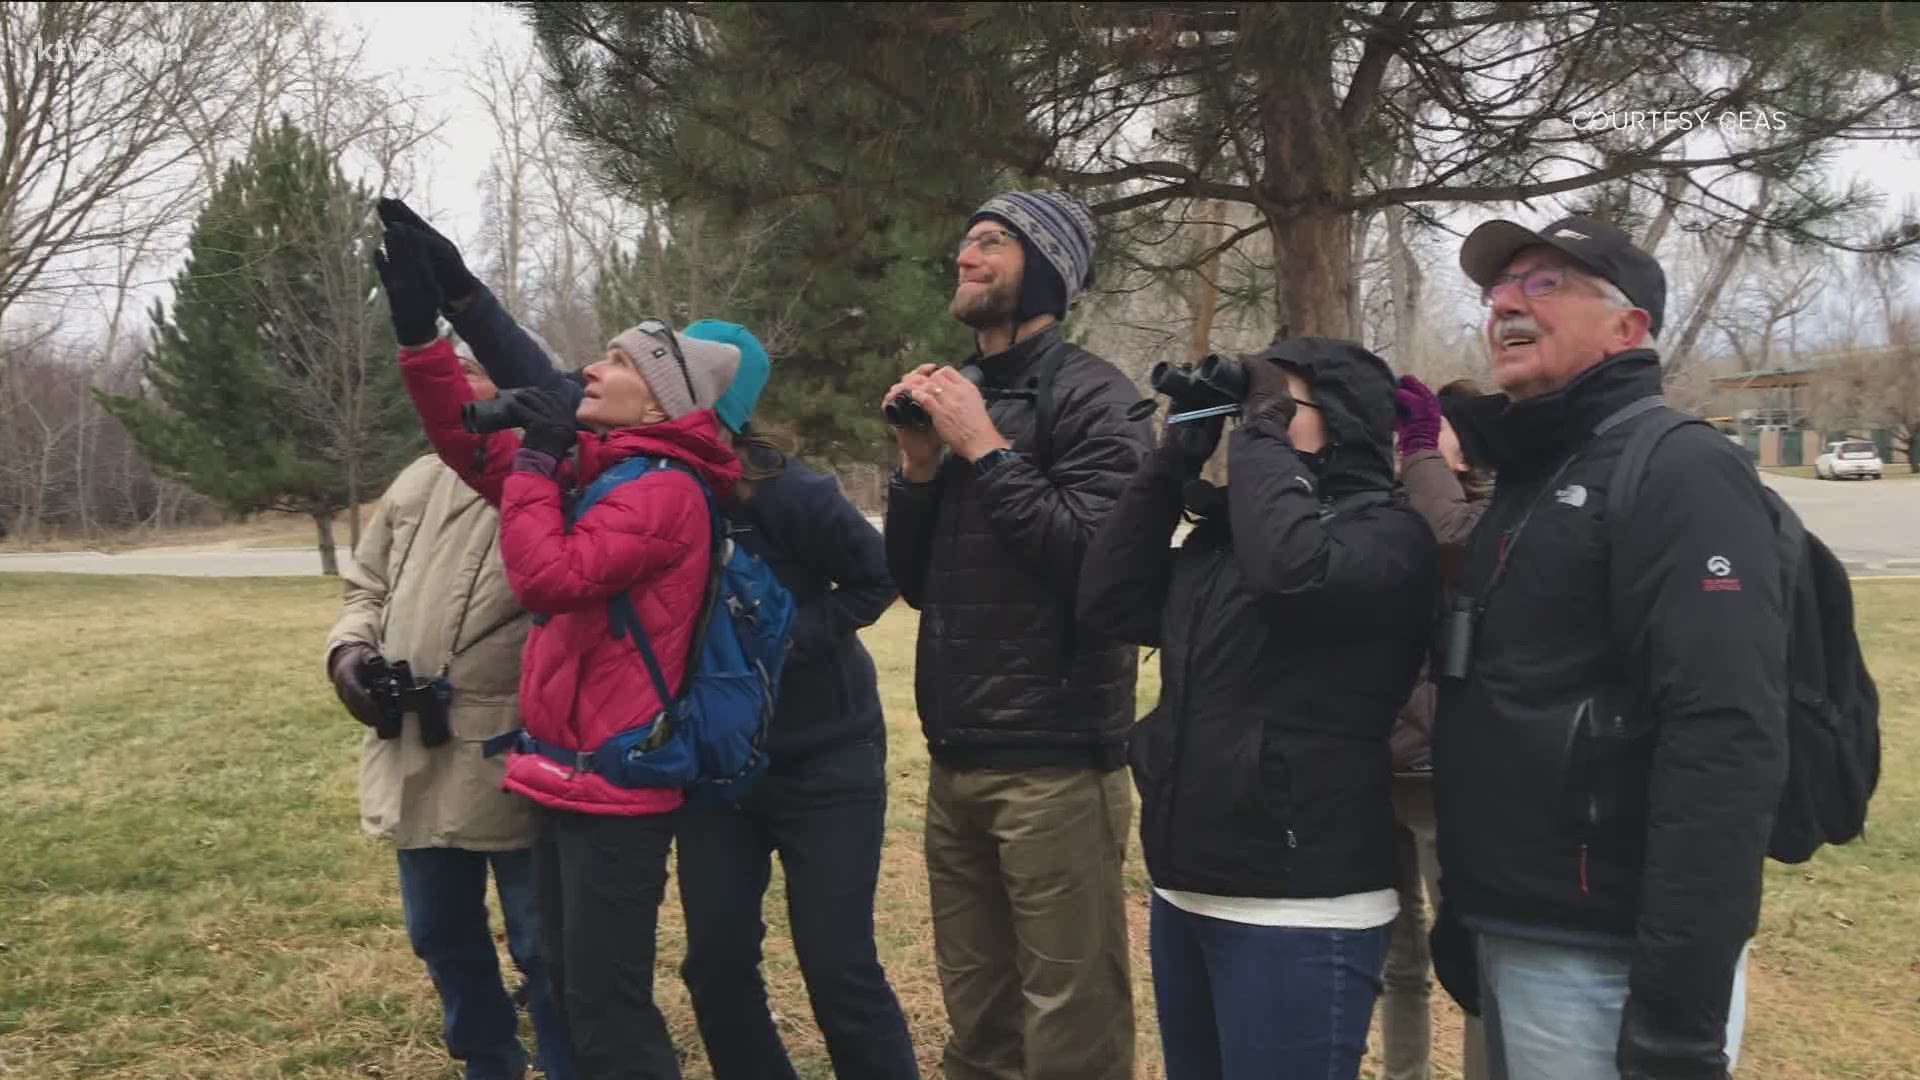 "I think one of the best things about birding is it's so accessible - anyone from any age, any physical ability, any background can get into birding."